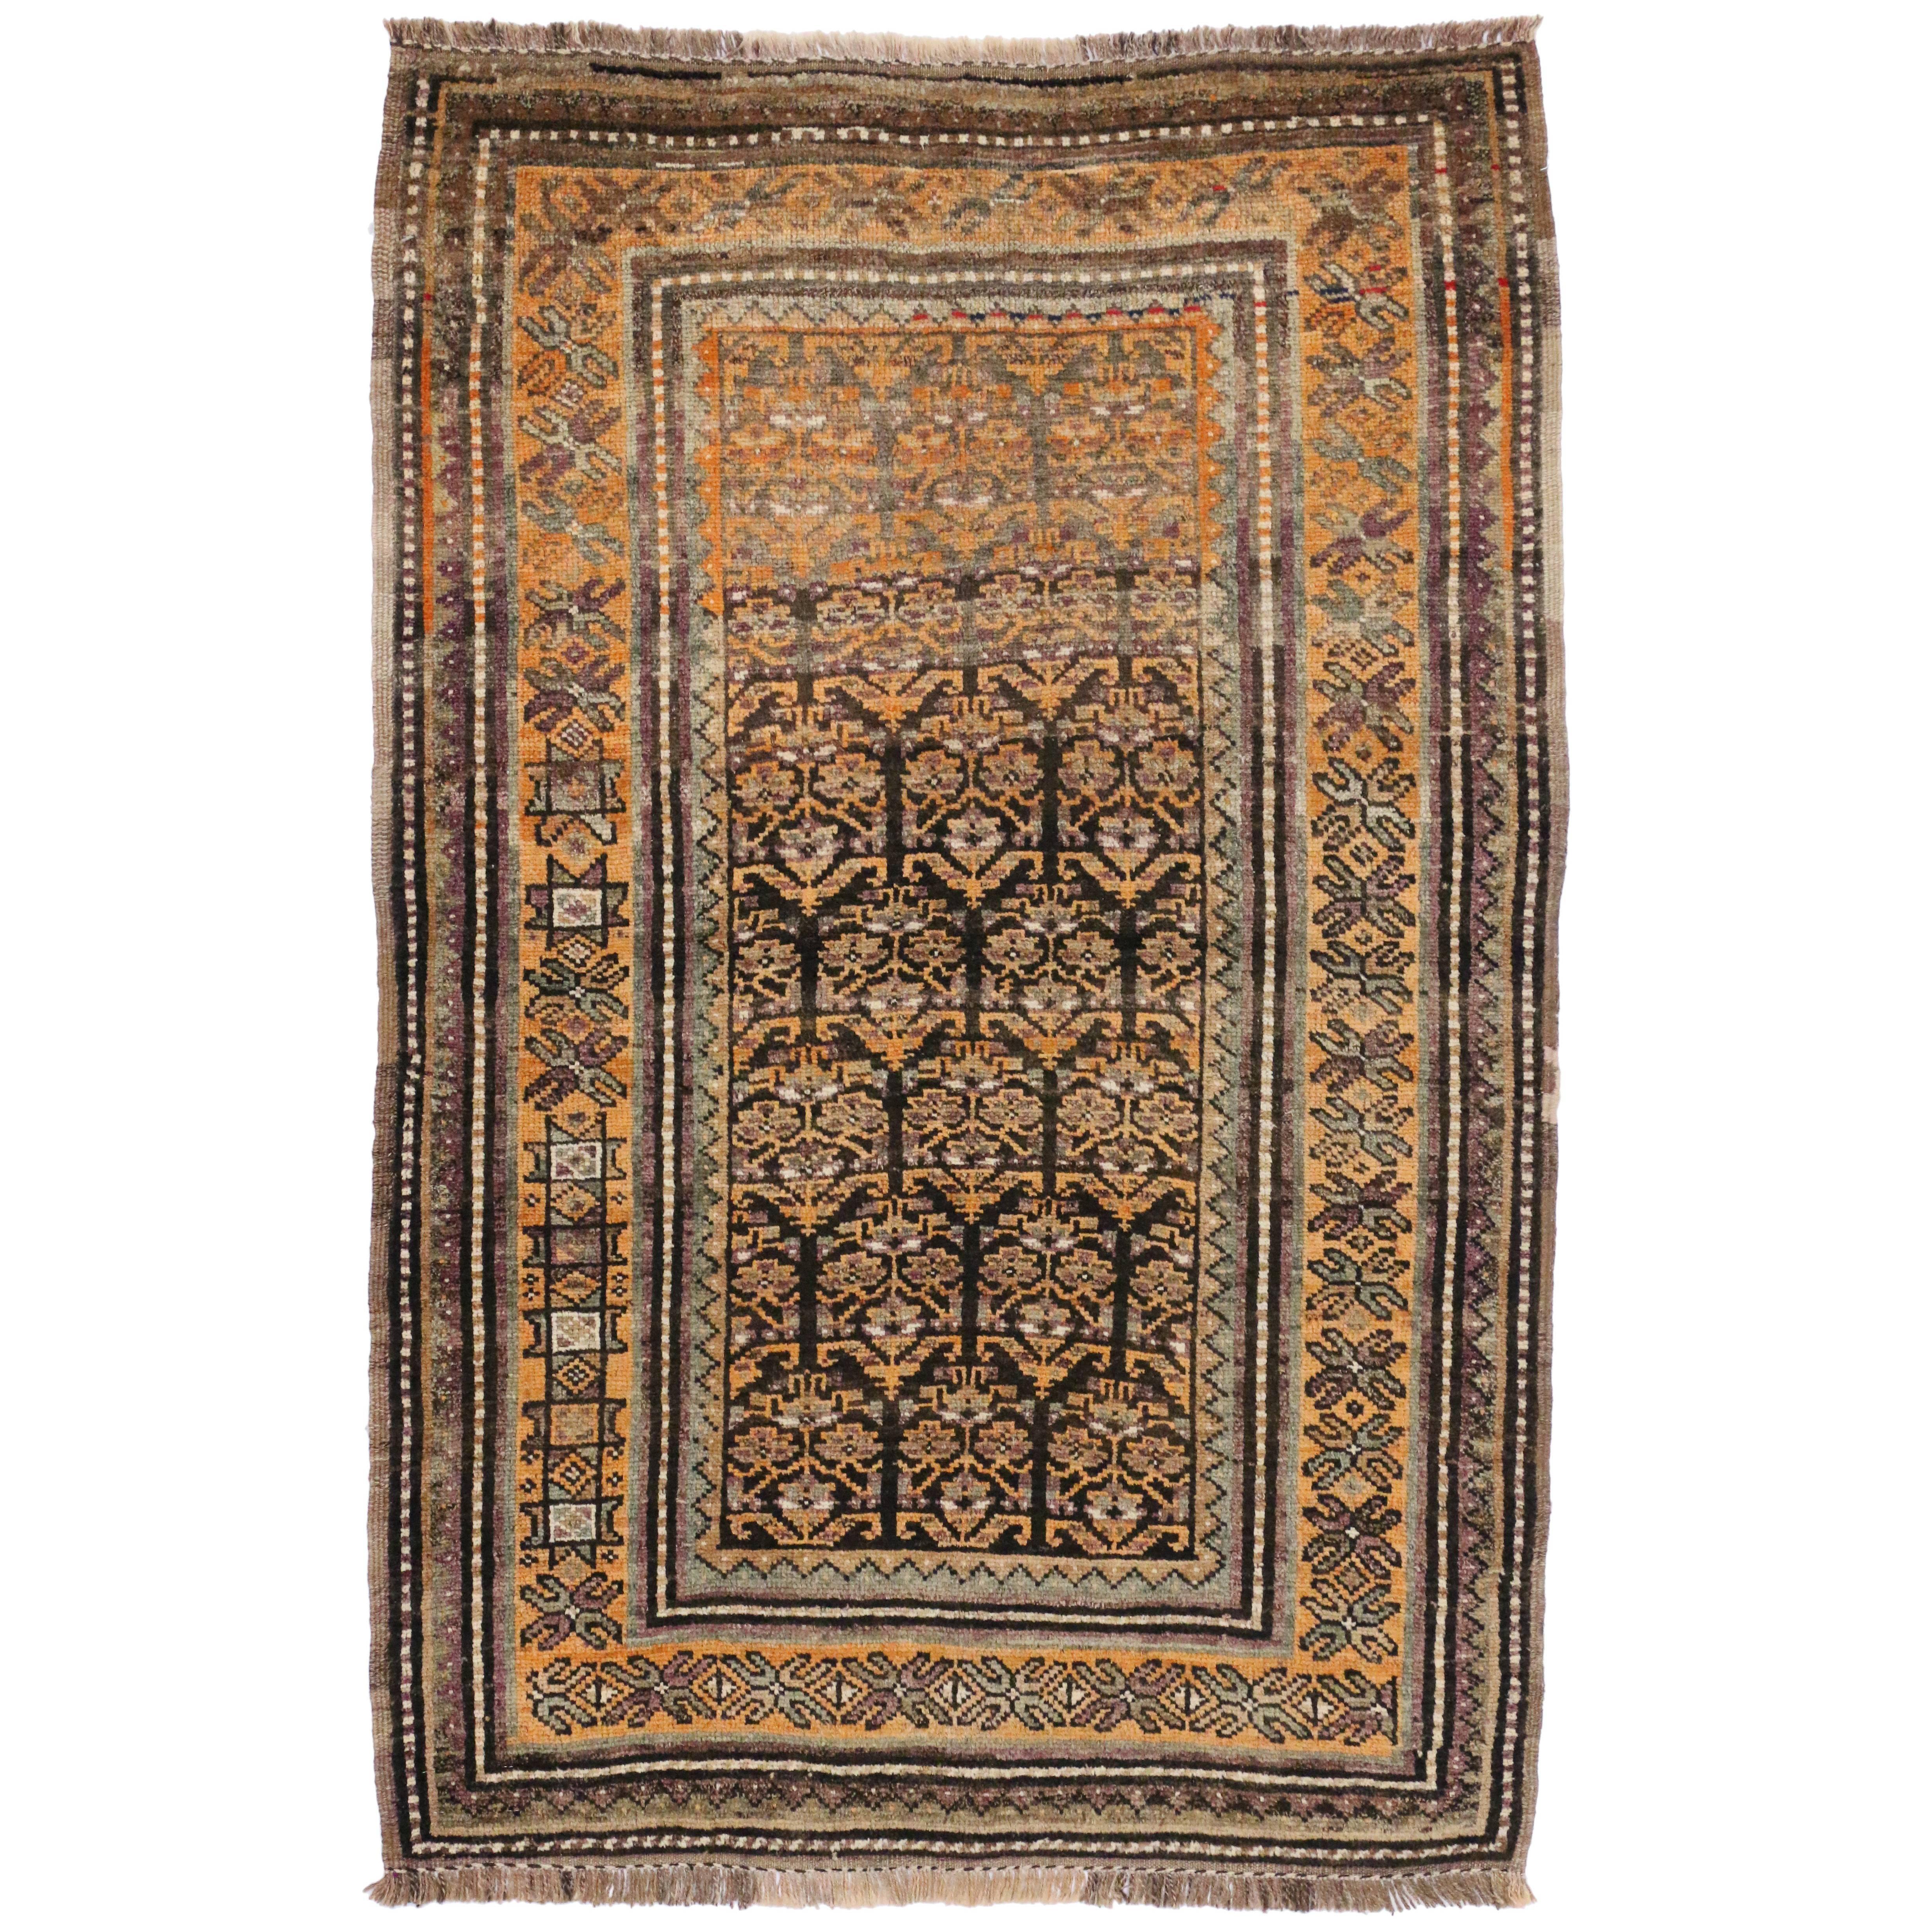 76431 Vintage Shiraz Persian Tribal Rug with Mid-Century Modern Style. Features an all-over and repetitive geometric pattern composed of blooming boteh motifs on an abrashed field surrounded by a series of borders and subsidiary saw-tooth guard